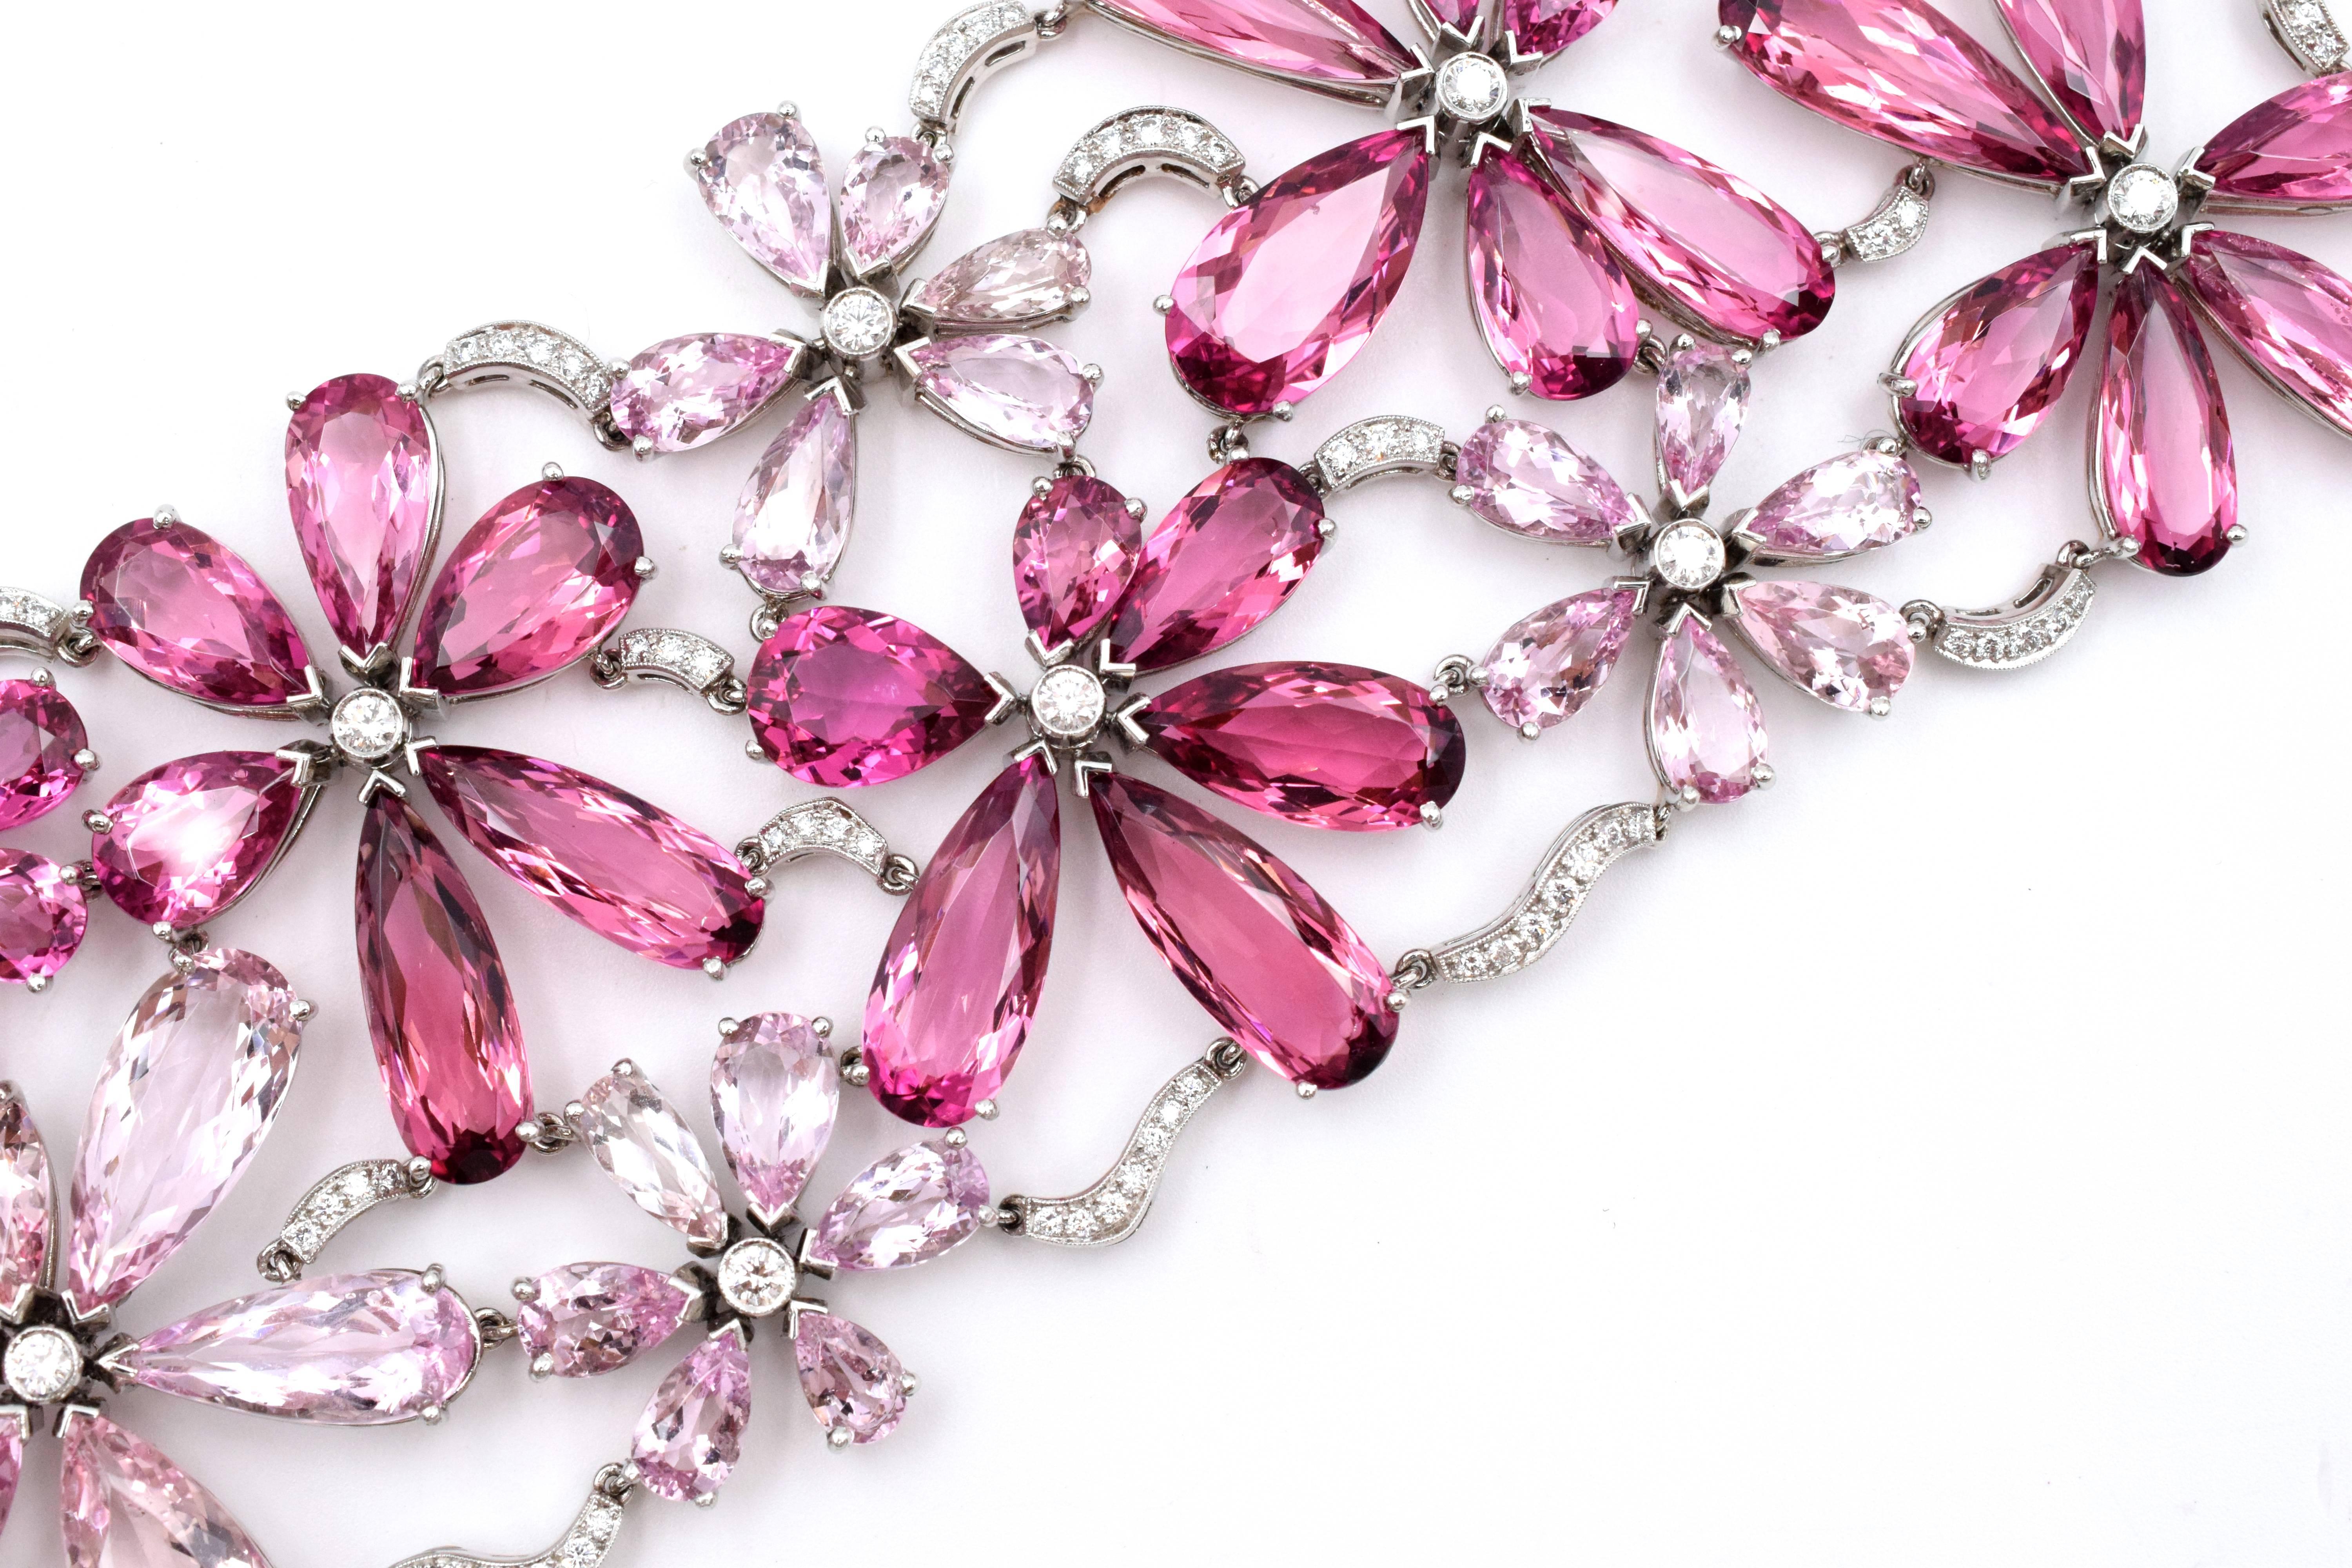 Colorful & floral design of Pink Tourmaline, Morganite and Diamond Bracelet by Tiffany & Co
This platinum floral design bracelet has 41 pear-shaped pink tourmalines are stated to weigh approximately 87 carats, the 42 pear-shaped morganites are